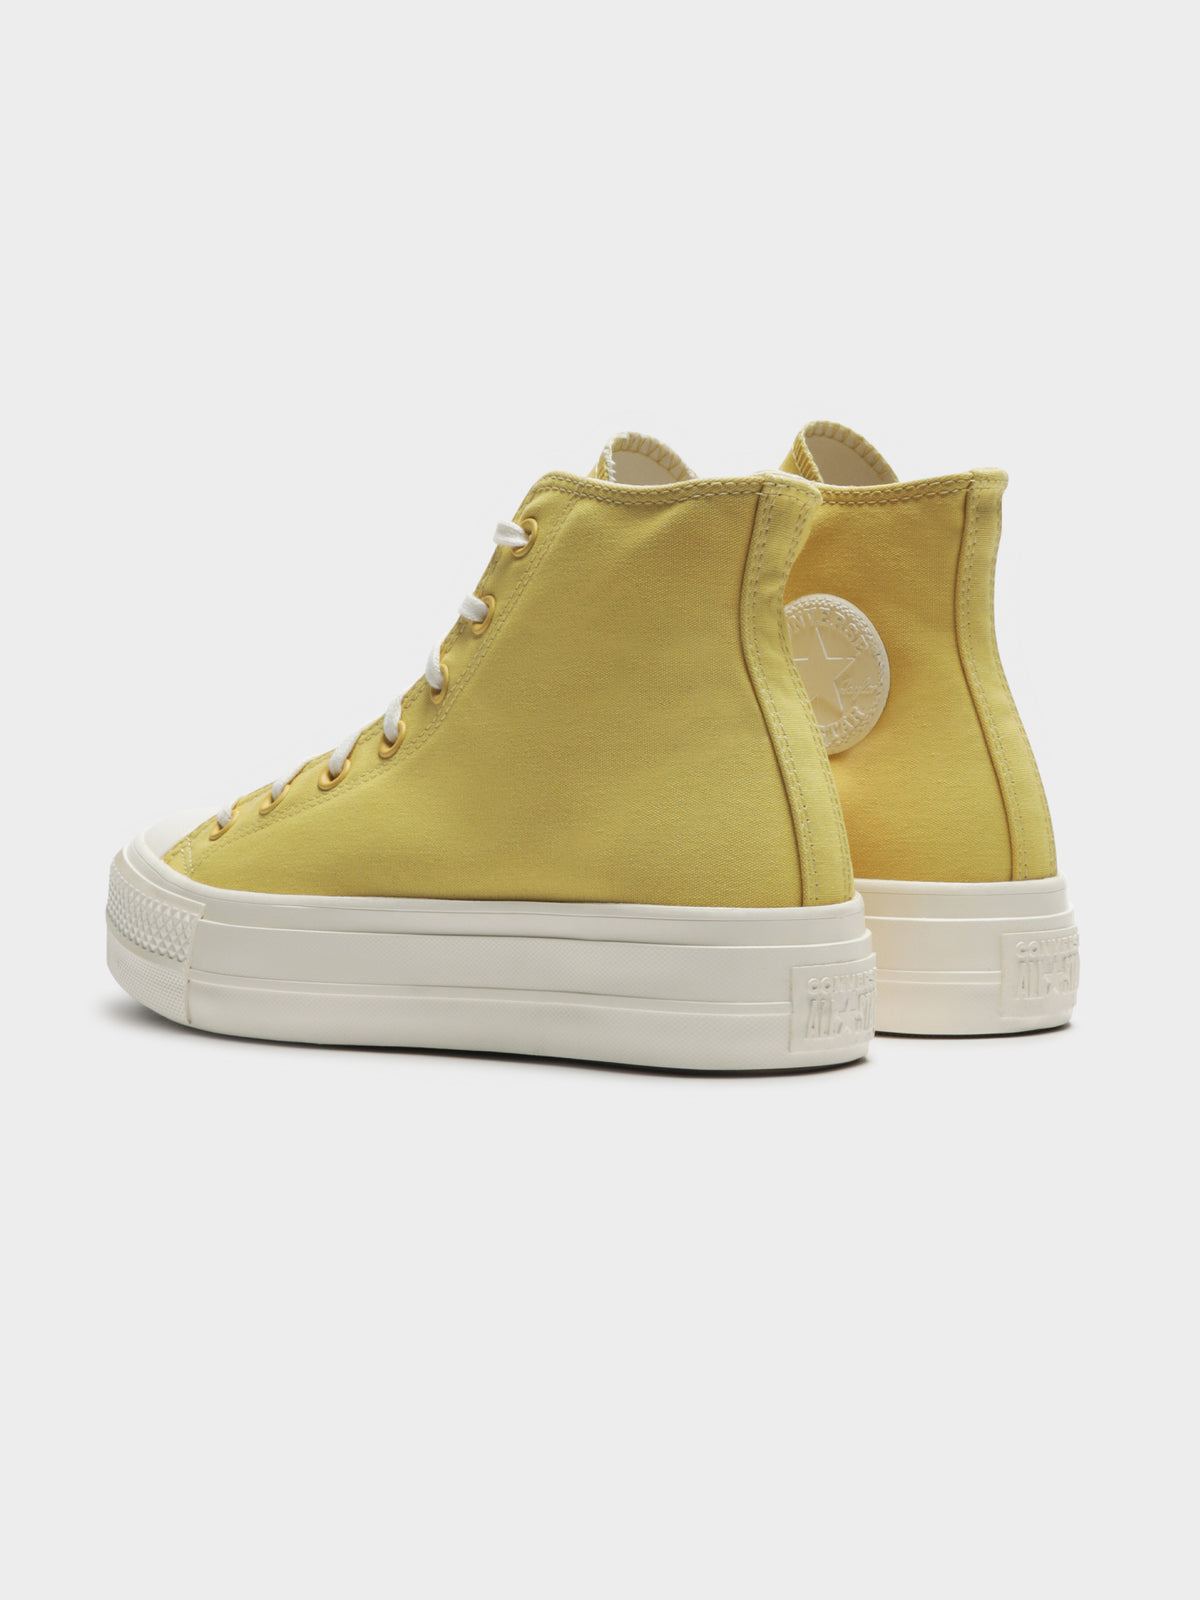 Womens Chuck All Star Recycled Platform Hi Sneakers in Yellow